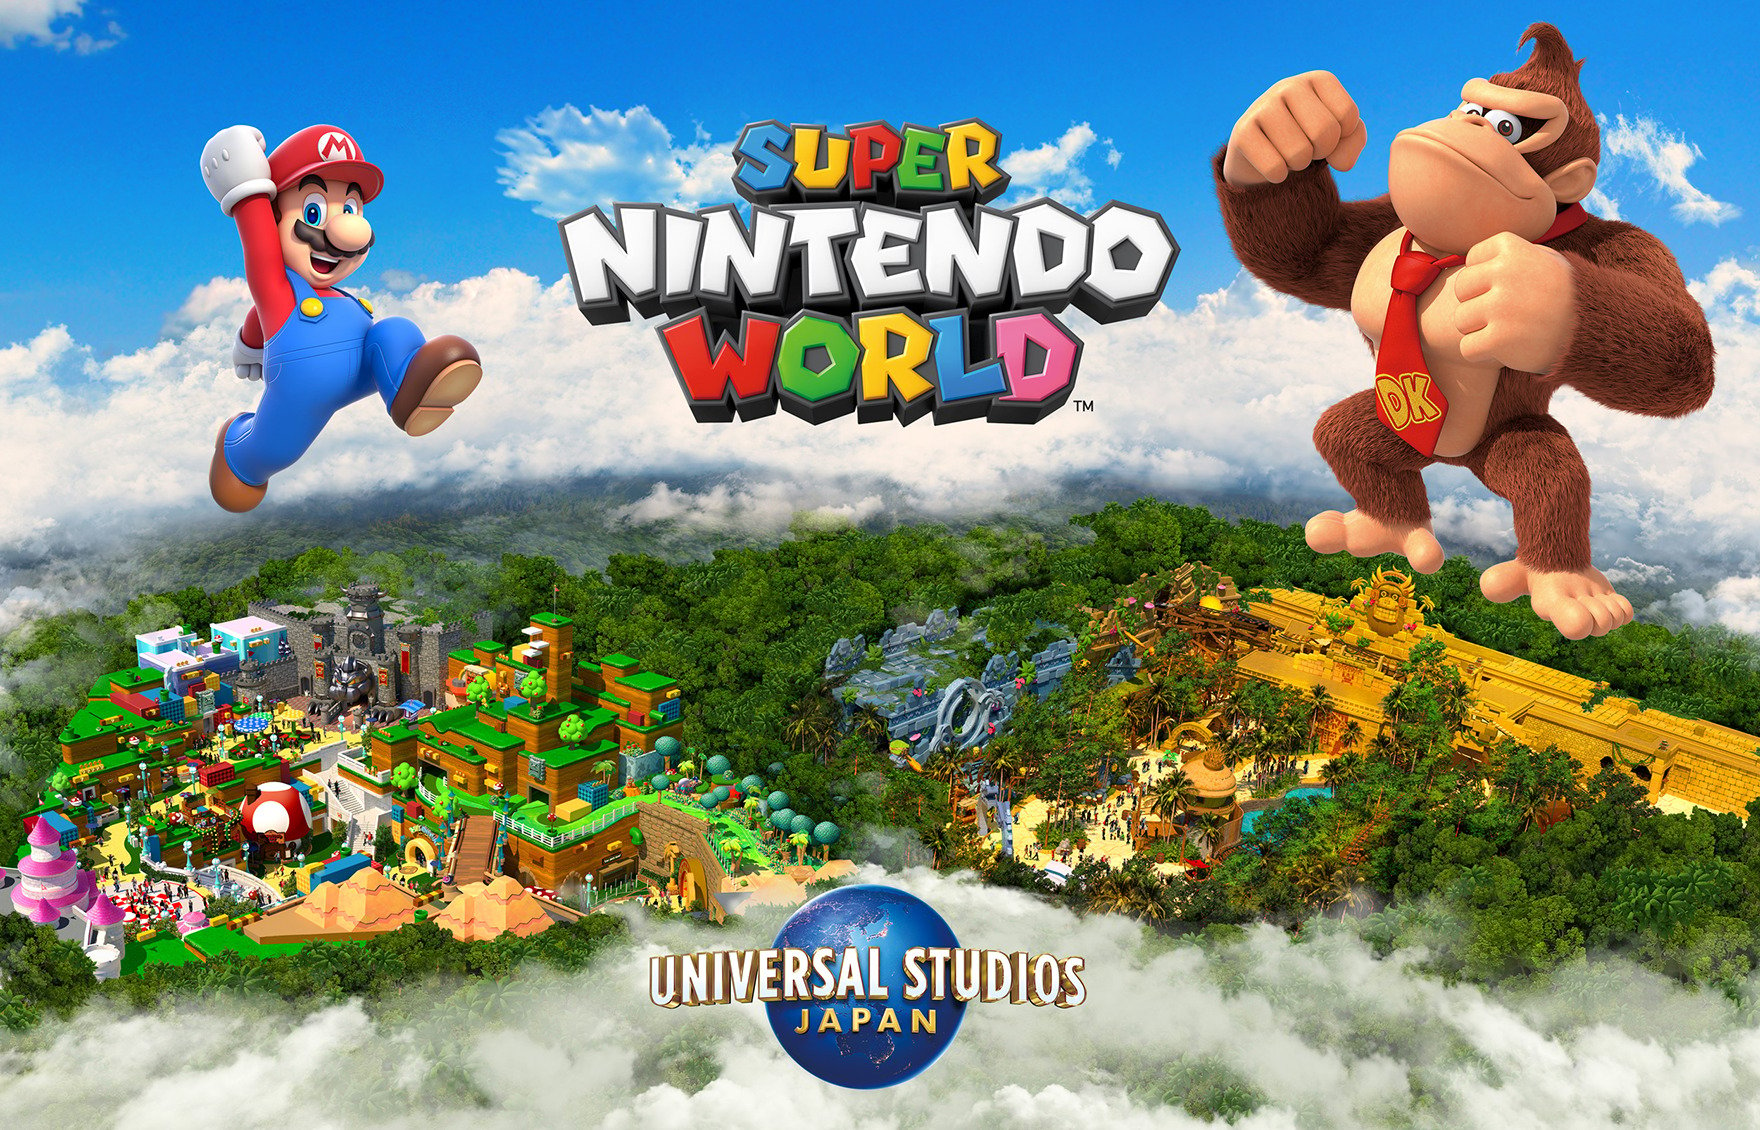 Super Nintendo World’s Donkey Kong expansion is officially opening in